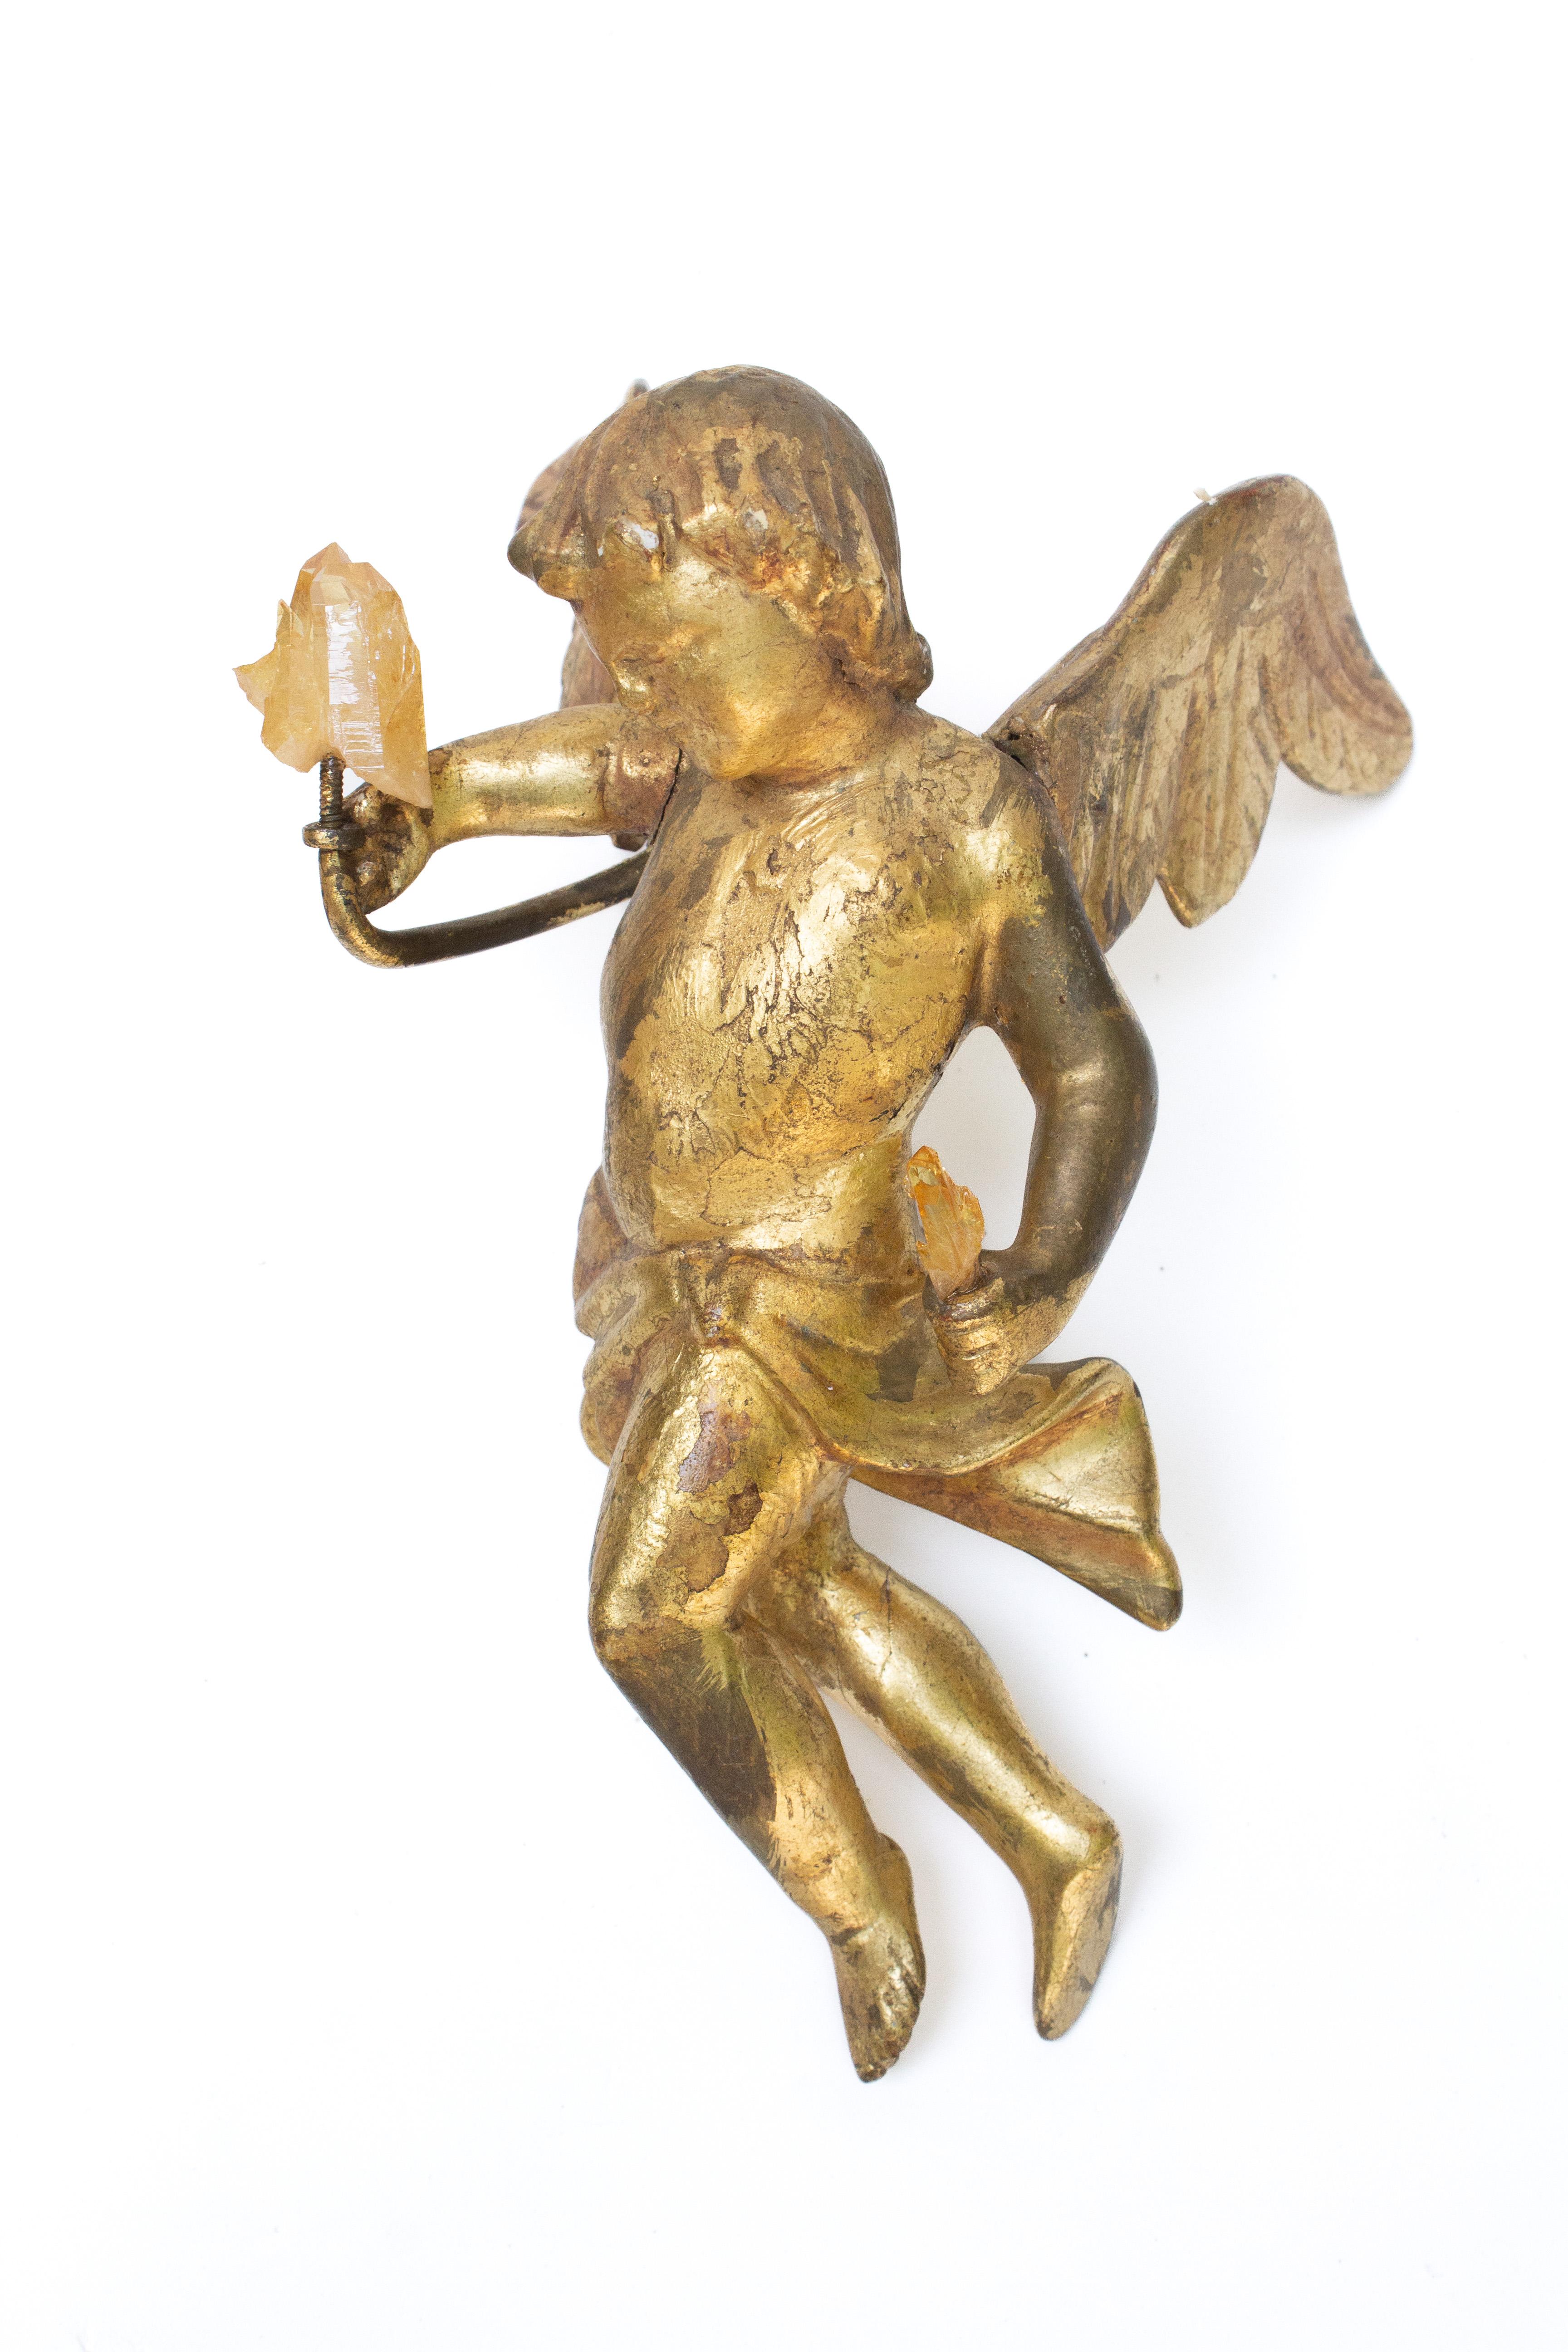 Pair of 18th Century Italian Gilded Angels with Golden Quartz Crystals  In Good Condition For Sale In Dublin, Dalkey